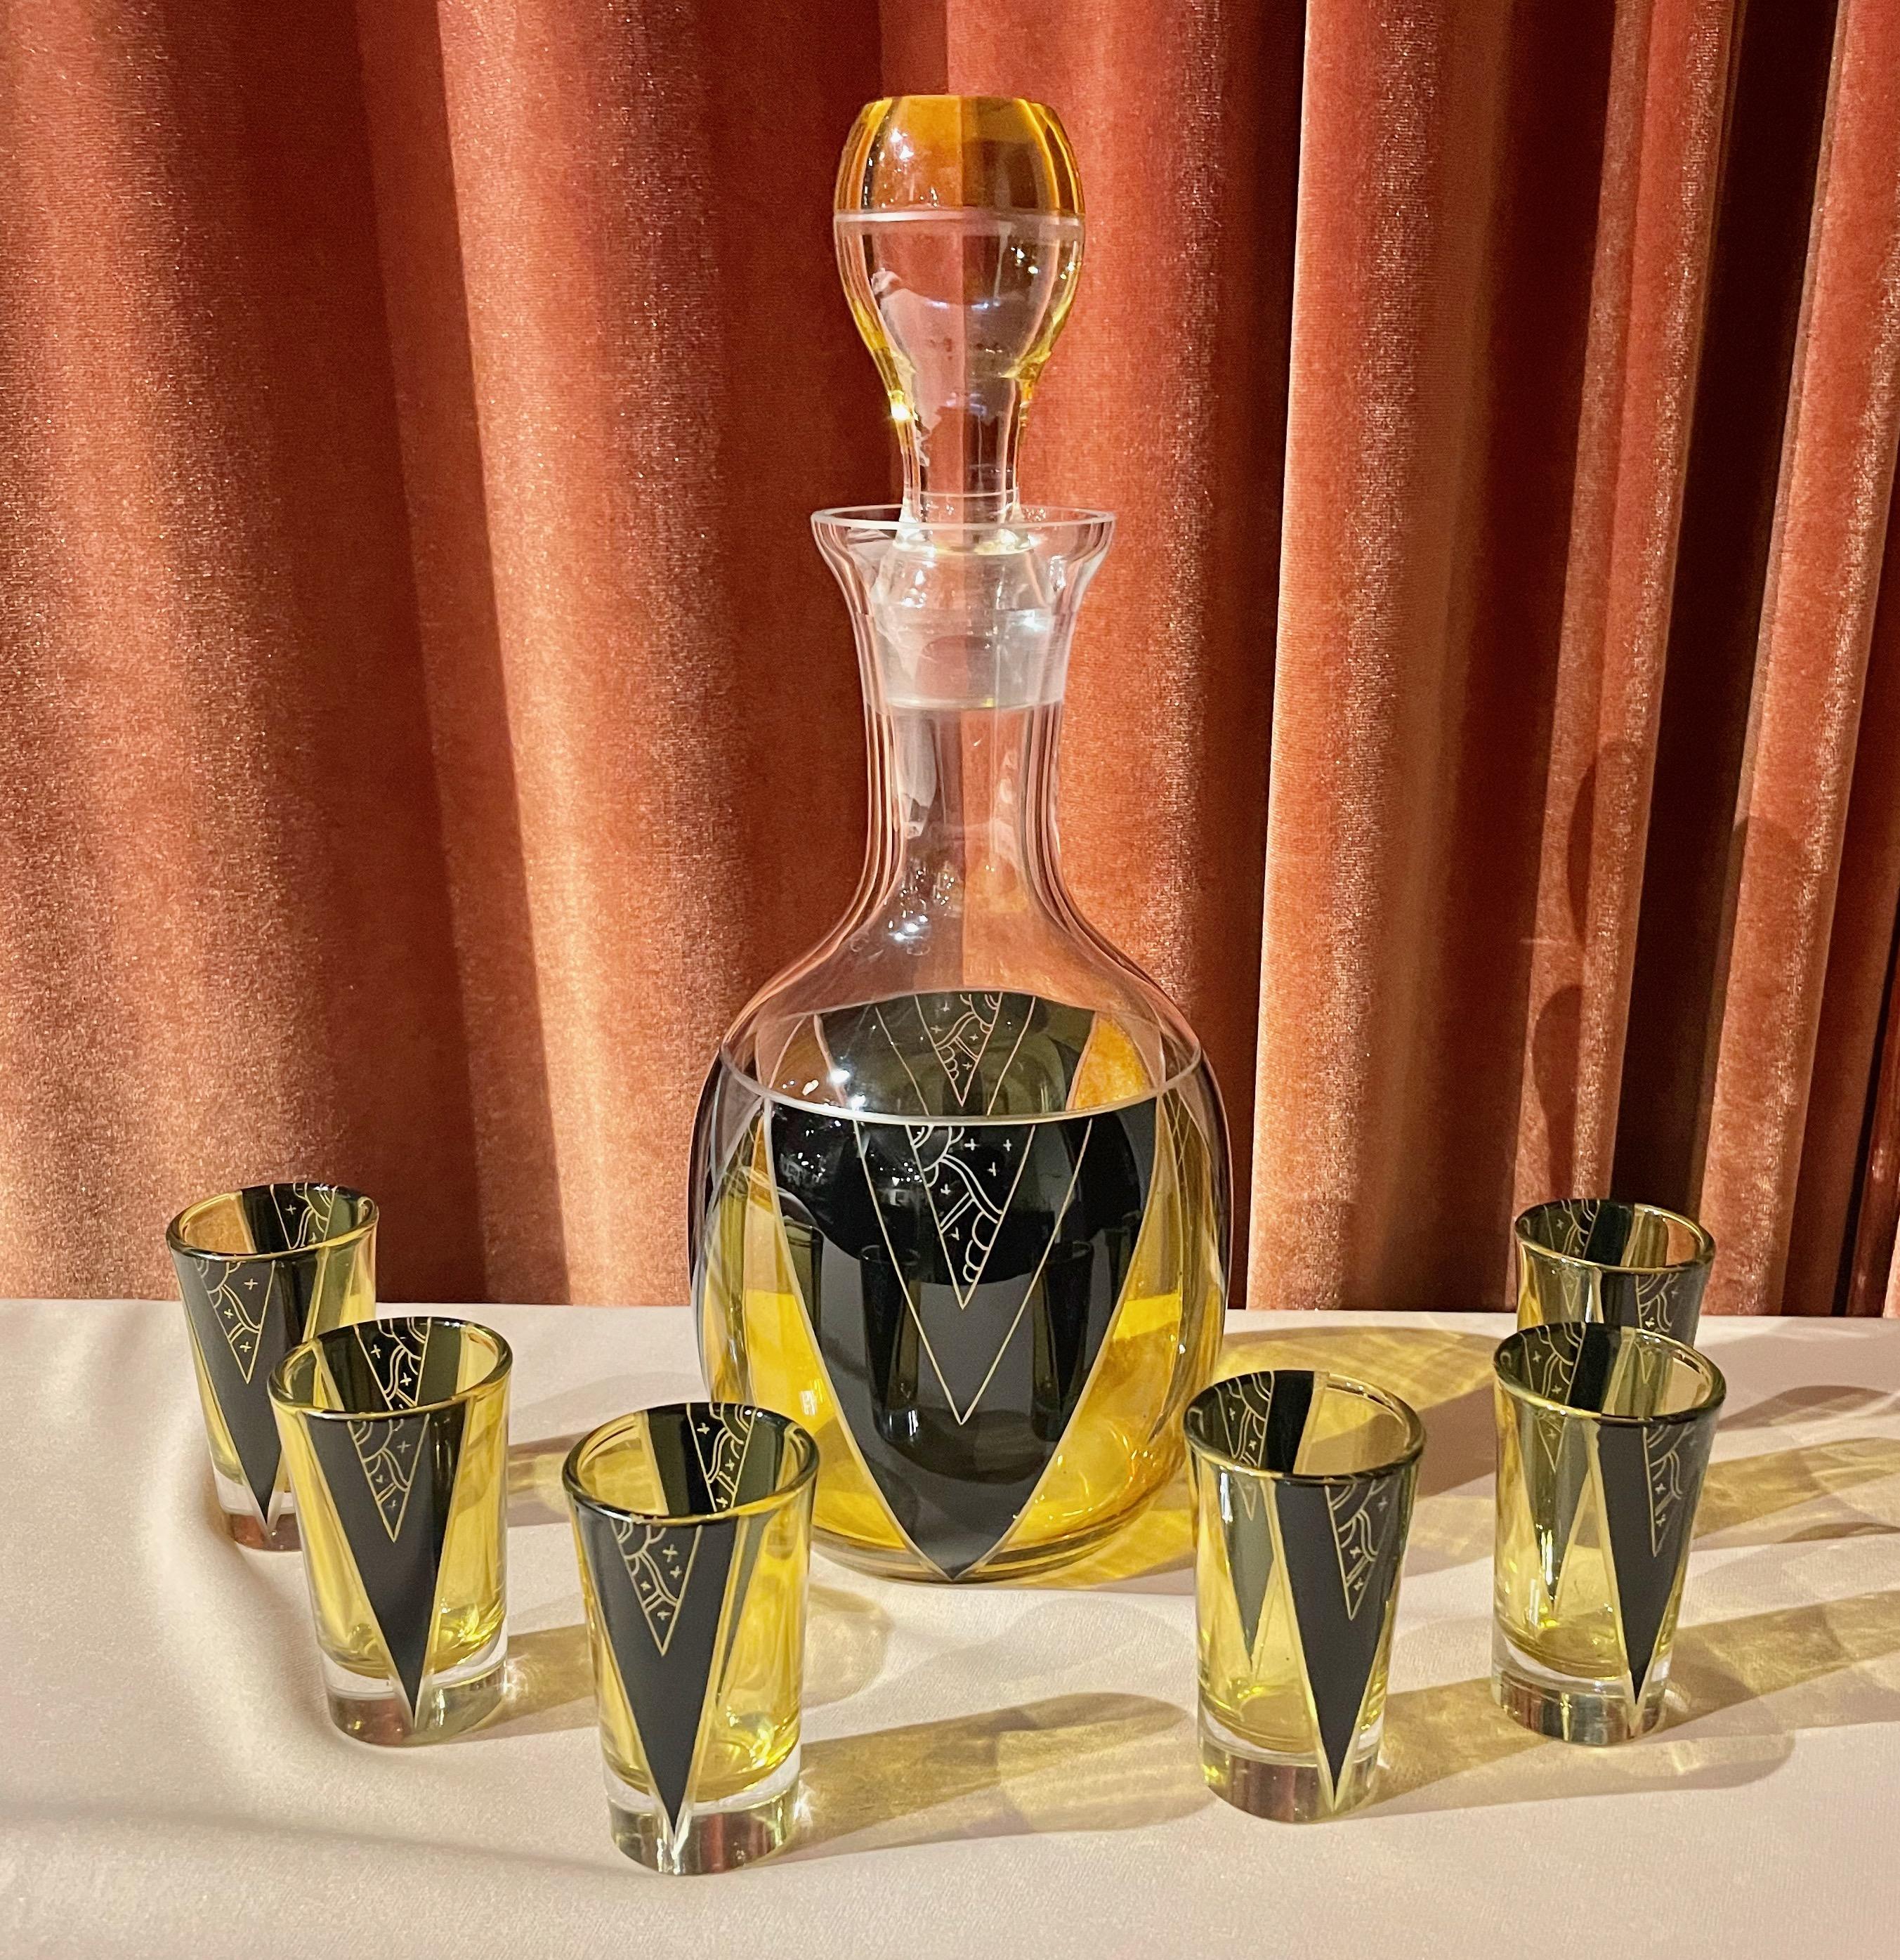 An original Art Deco decanter set by Karl Palda, the master of Czechoslovakian glass design. This decanter is a bit unusual: It has an oversized round pouring spout and is capped with an oversized domed stopper. The design and on the decanter has a